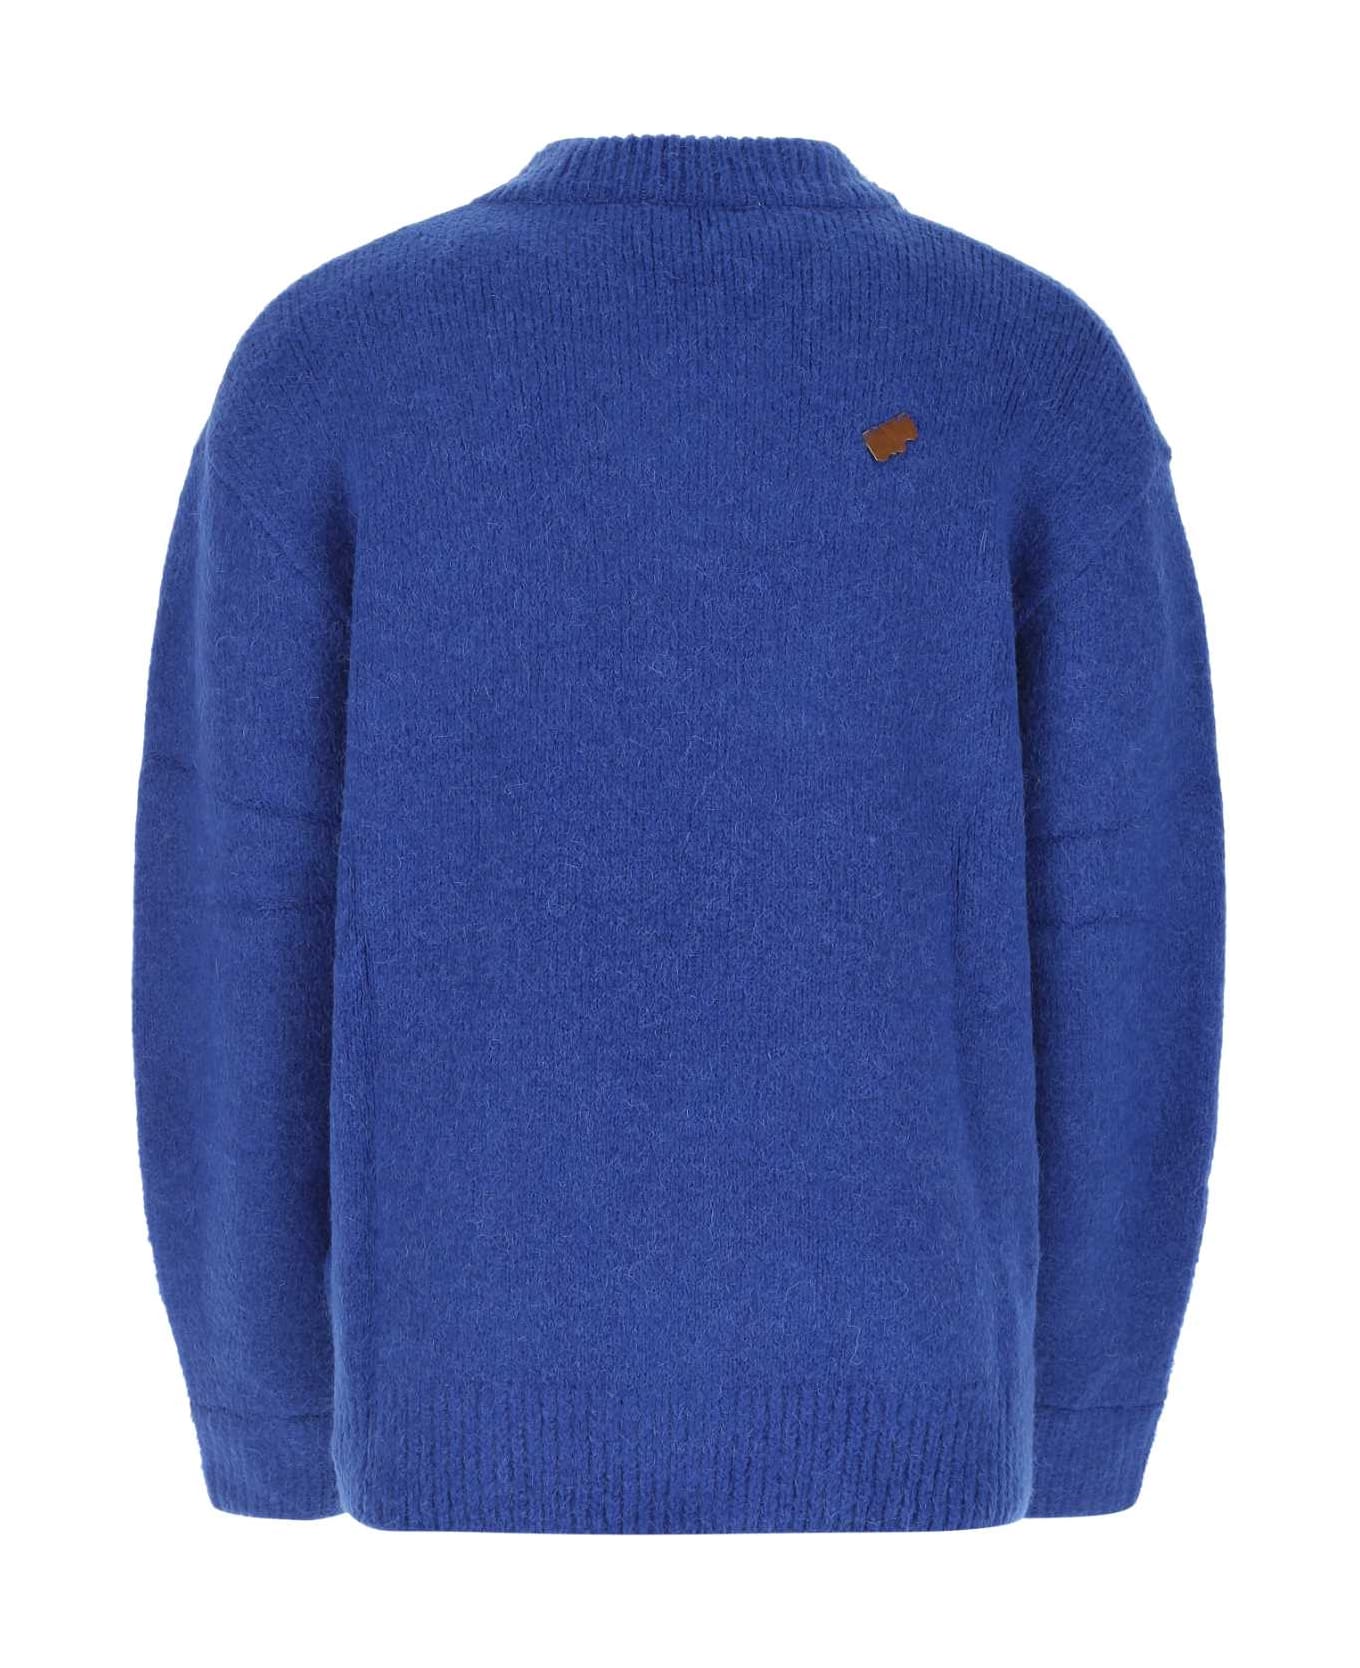 Ader Error Electric Blue Acrylic Blend Sweater - BLUE